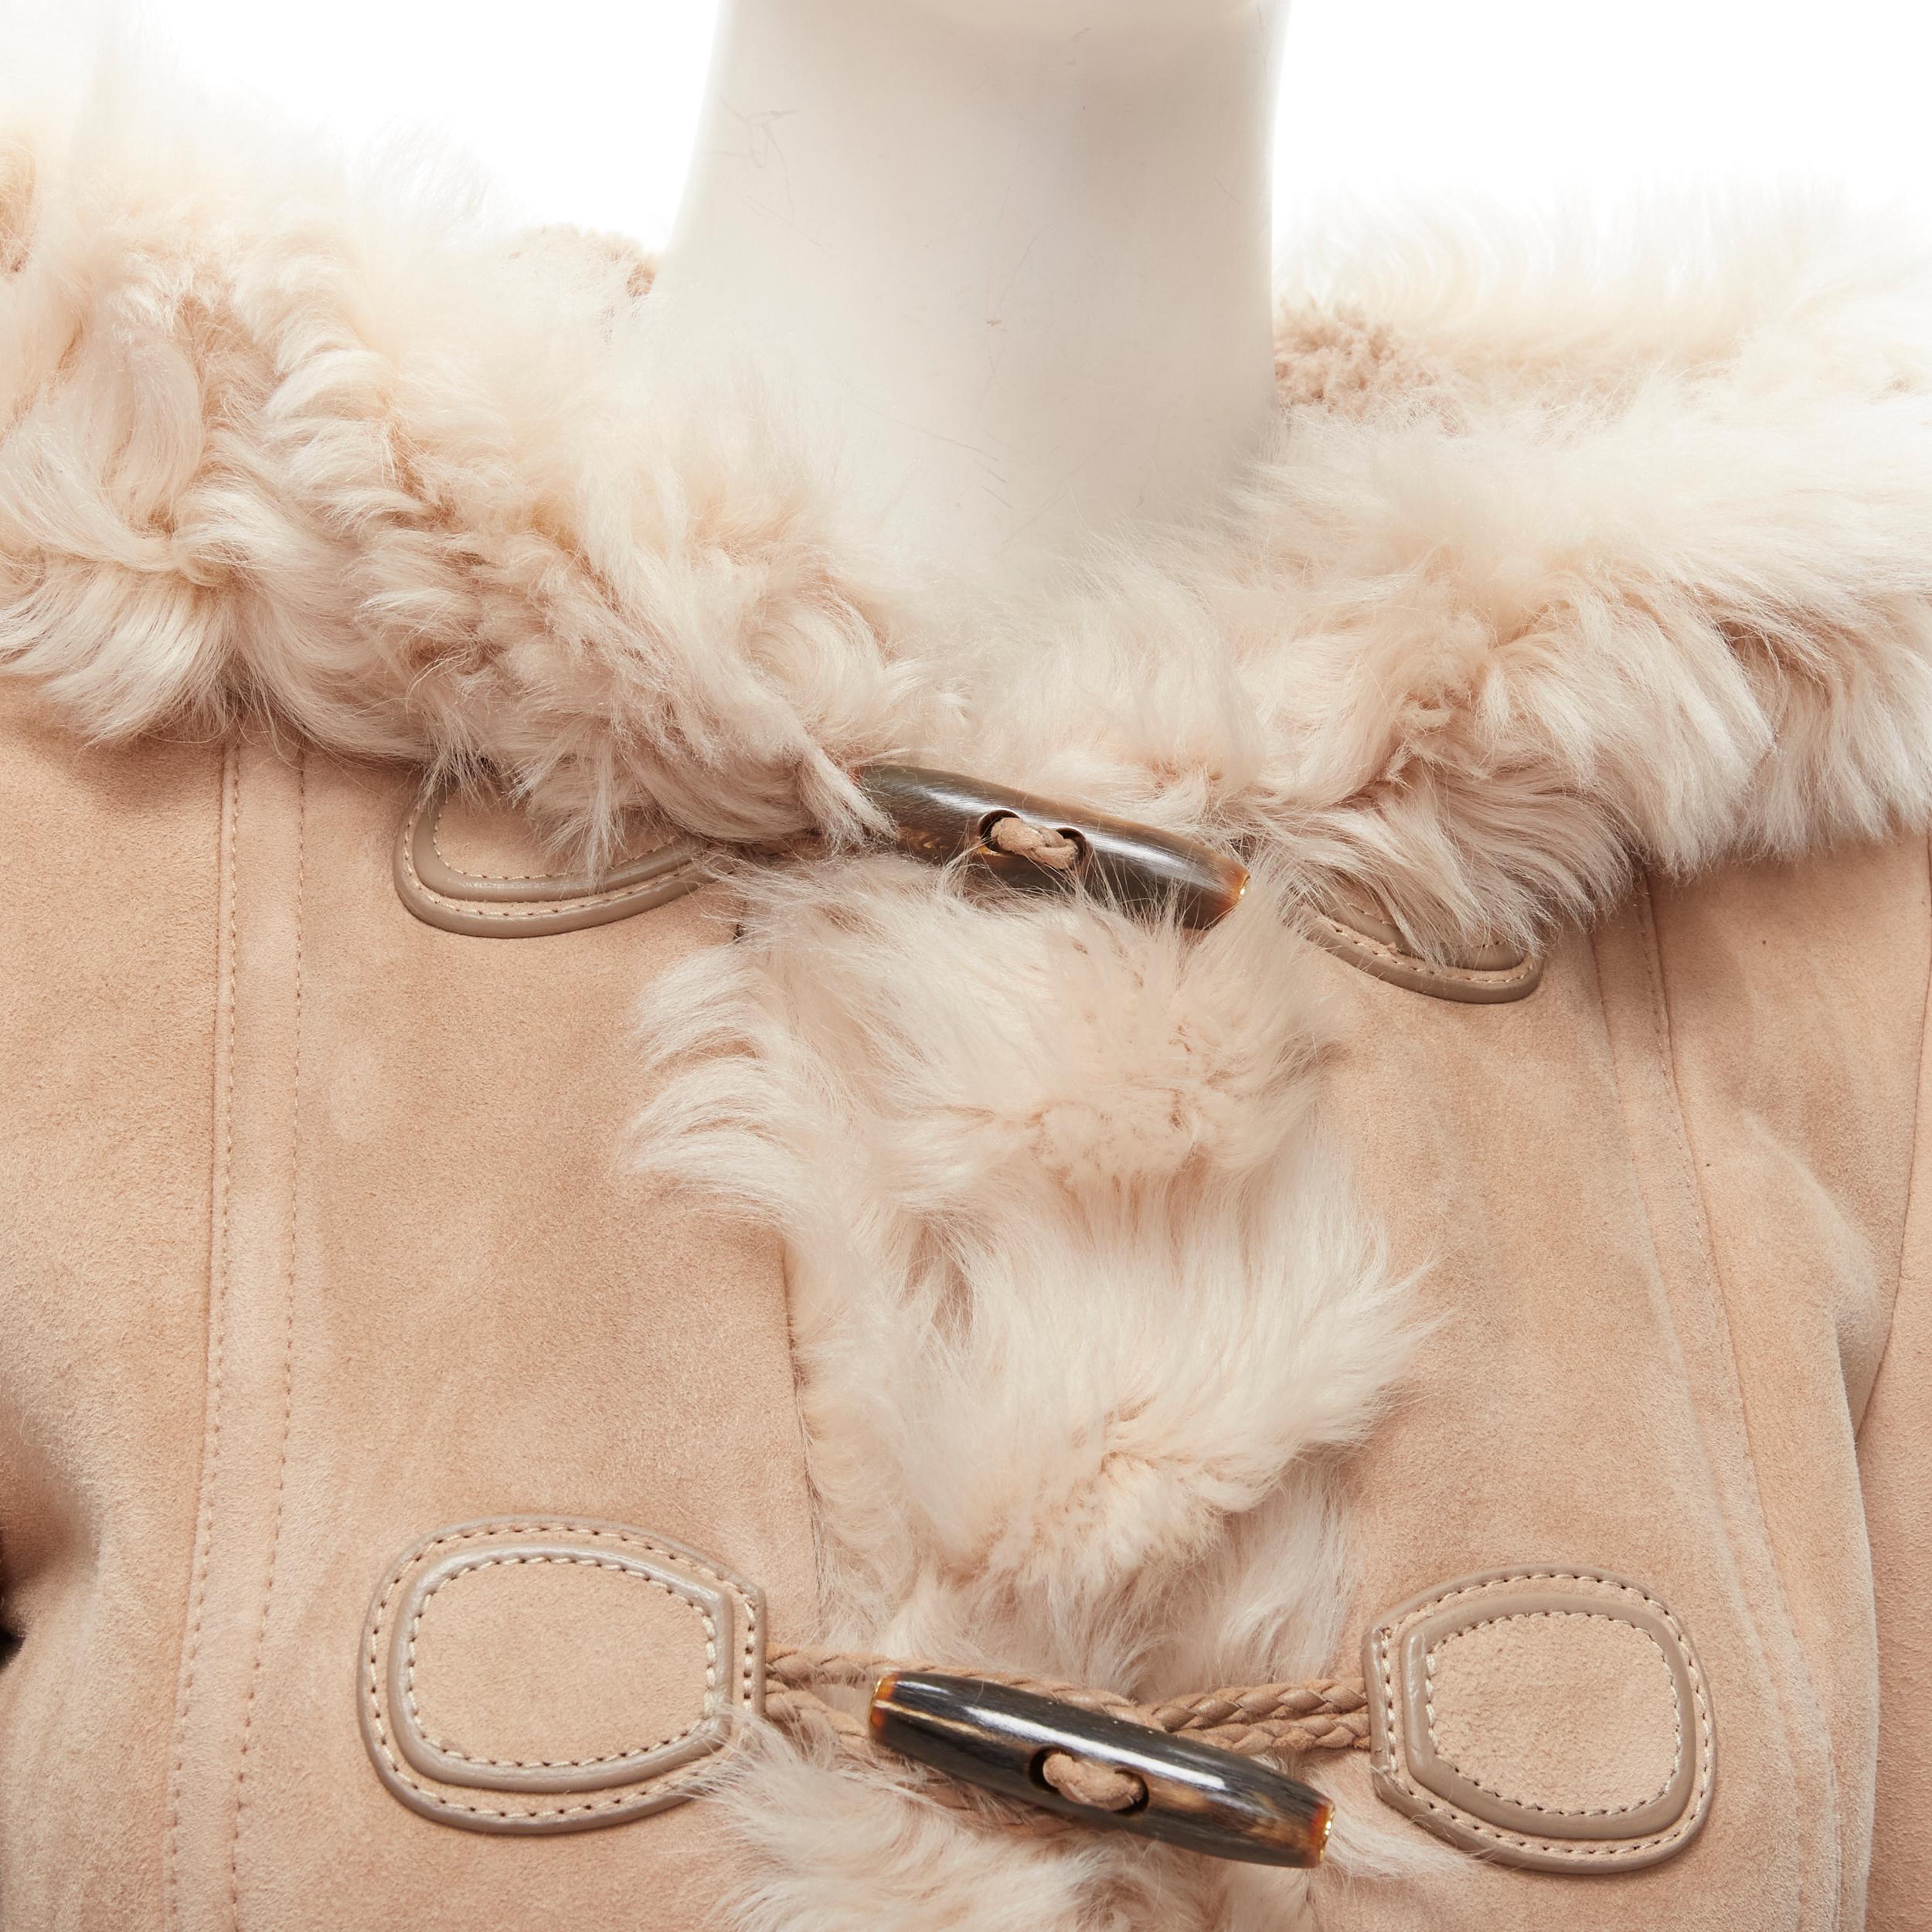 GUCCI Tom Ford Vintage beige sheep shearling suede hooded duffle coat IT36 XXS
Reference: TGAS/C01625
Brand: Gucci
Designer: Tom Ford
Material: Suede
Color: Brown
Pattern: Solid
Closure: Button
Lining: Suede
Extra Details: Side pockets at